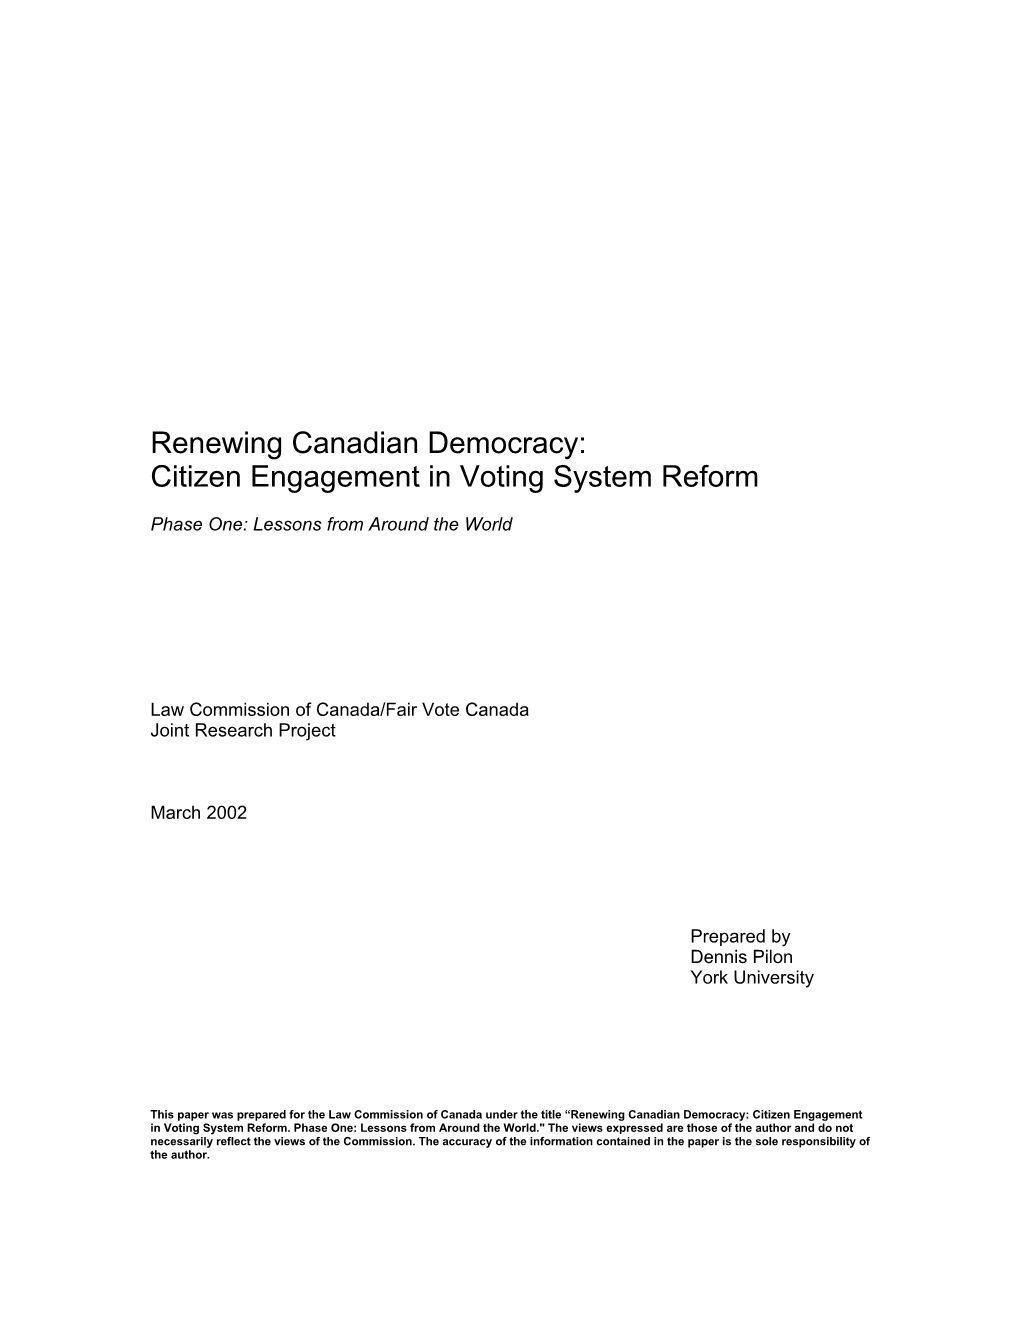 Citizen Engagement in Voting System Reform